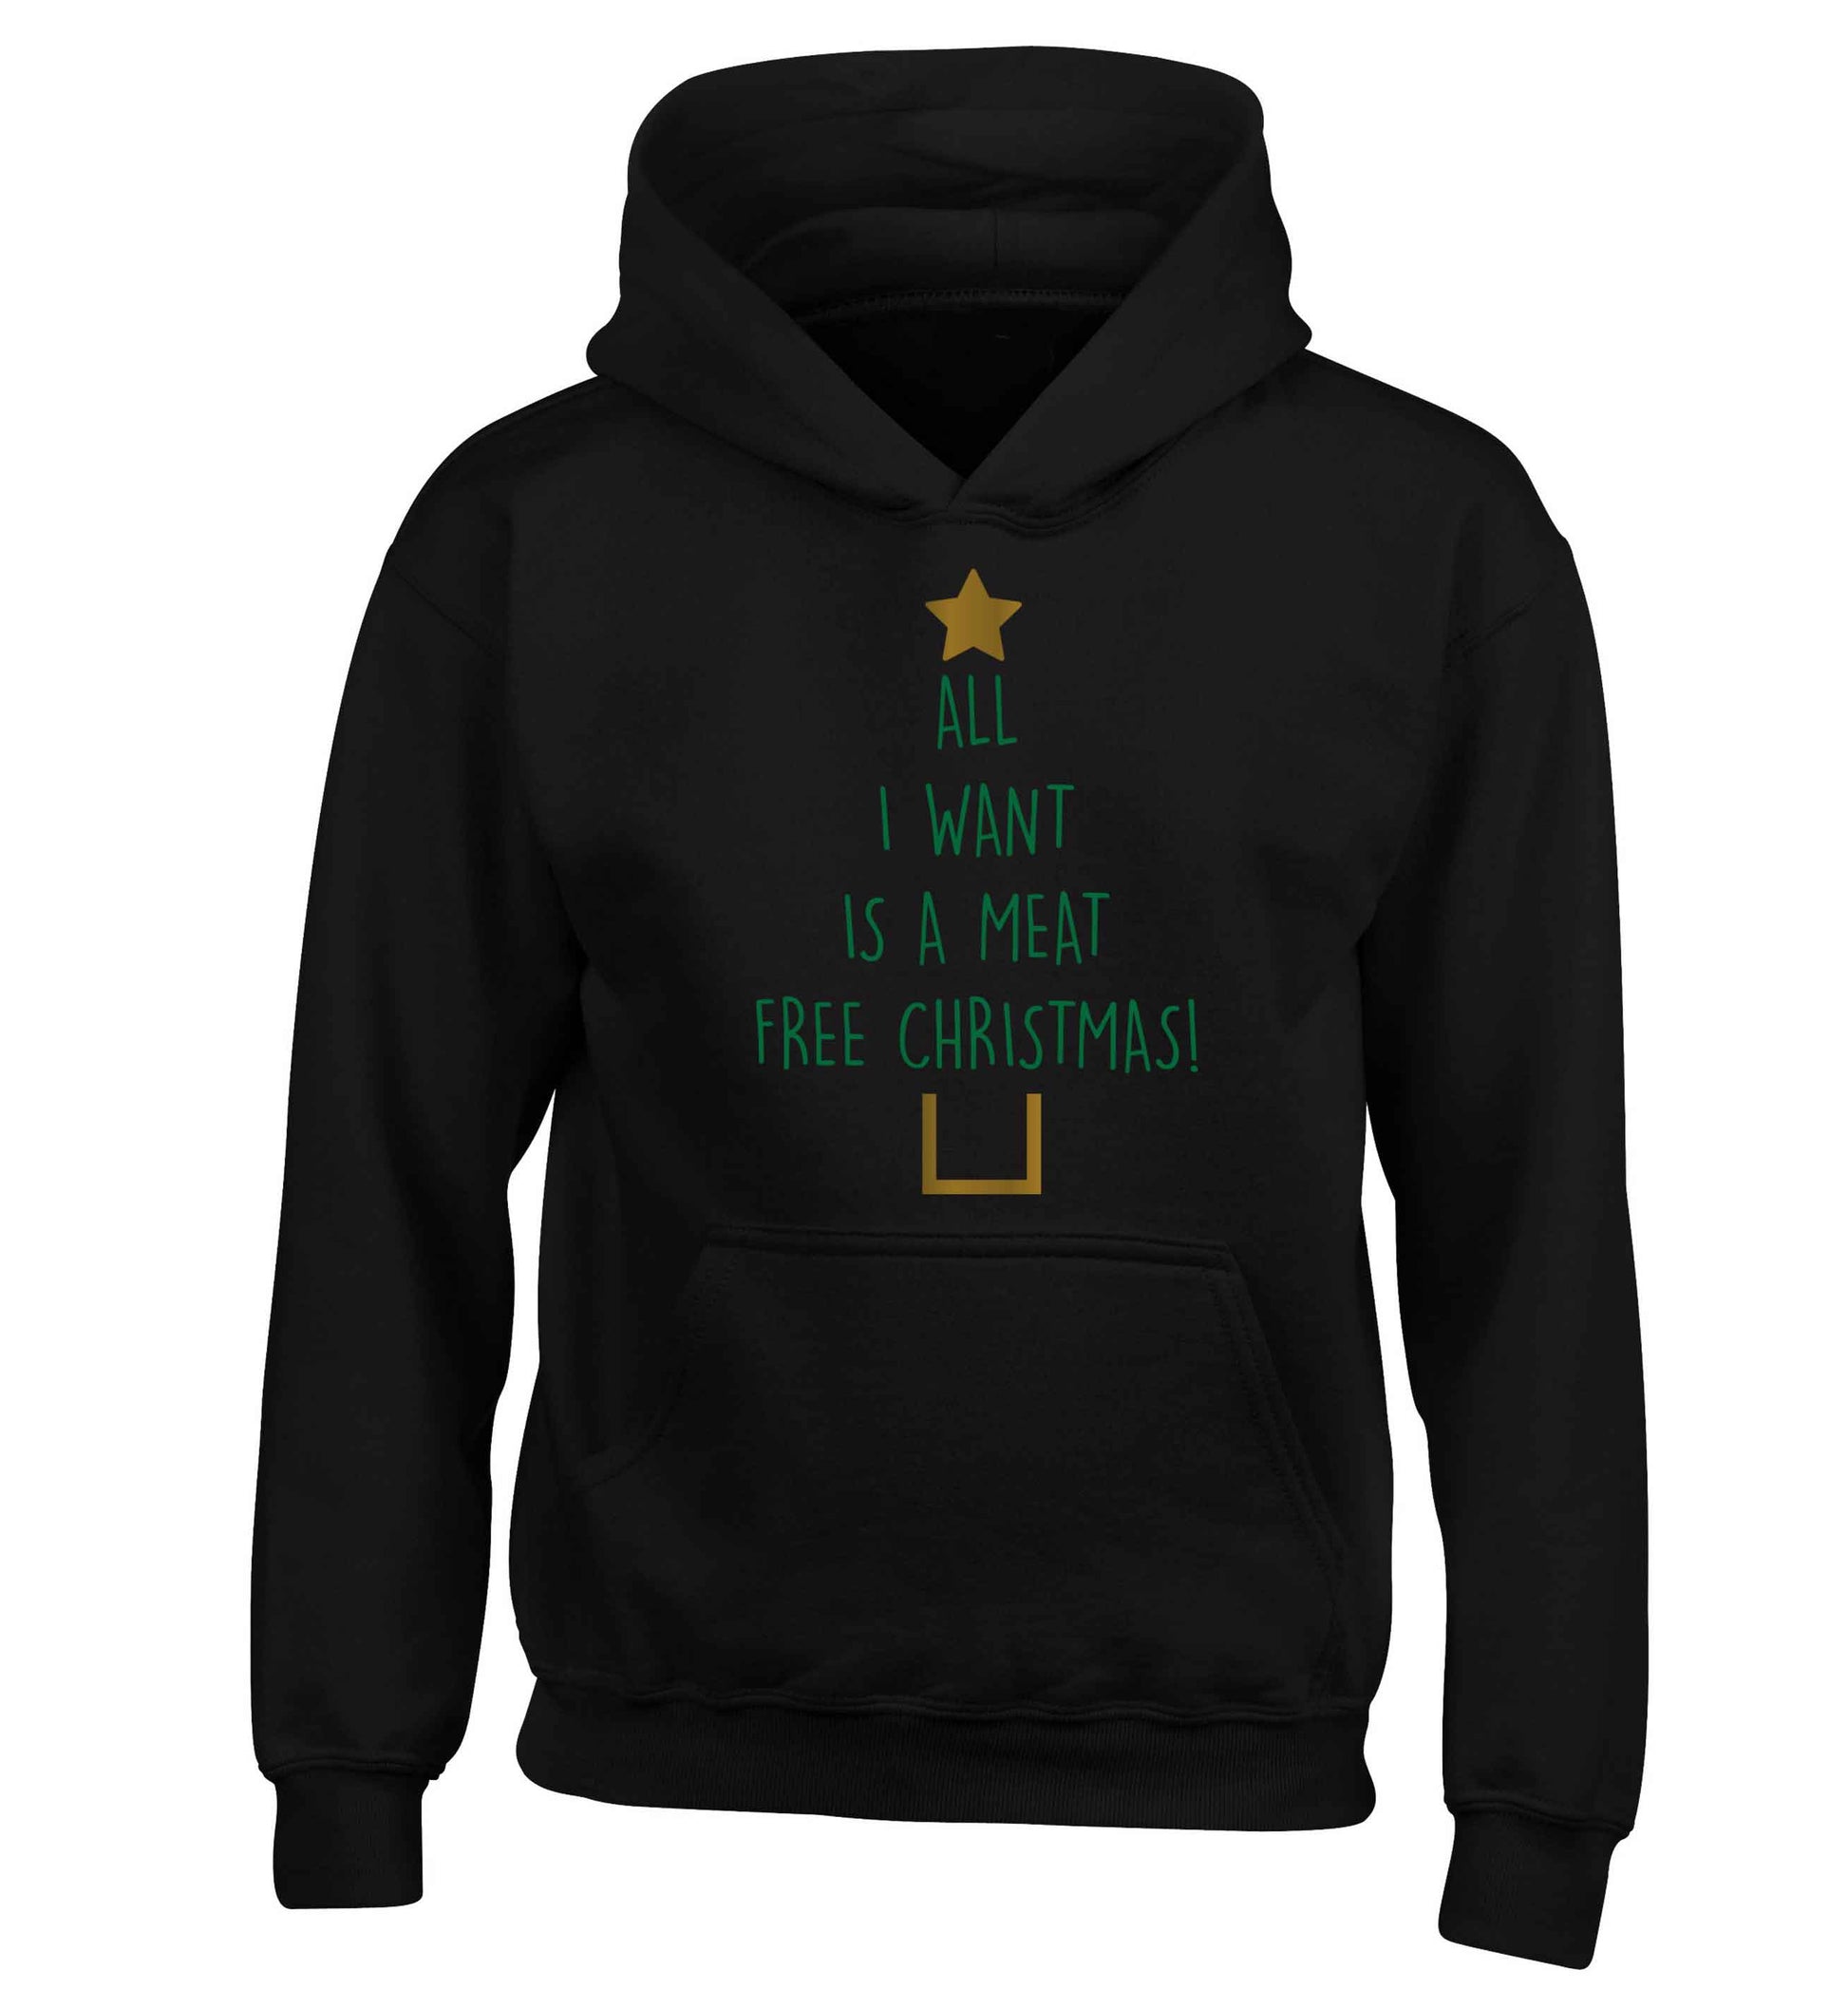 All I want is a meat free Christmas children's black hoodie 12-13 Years